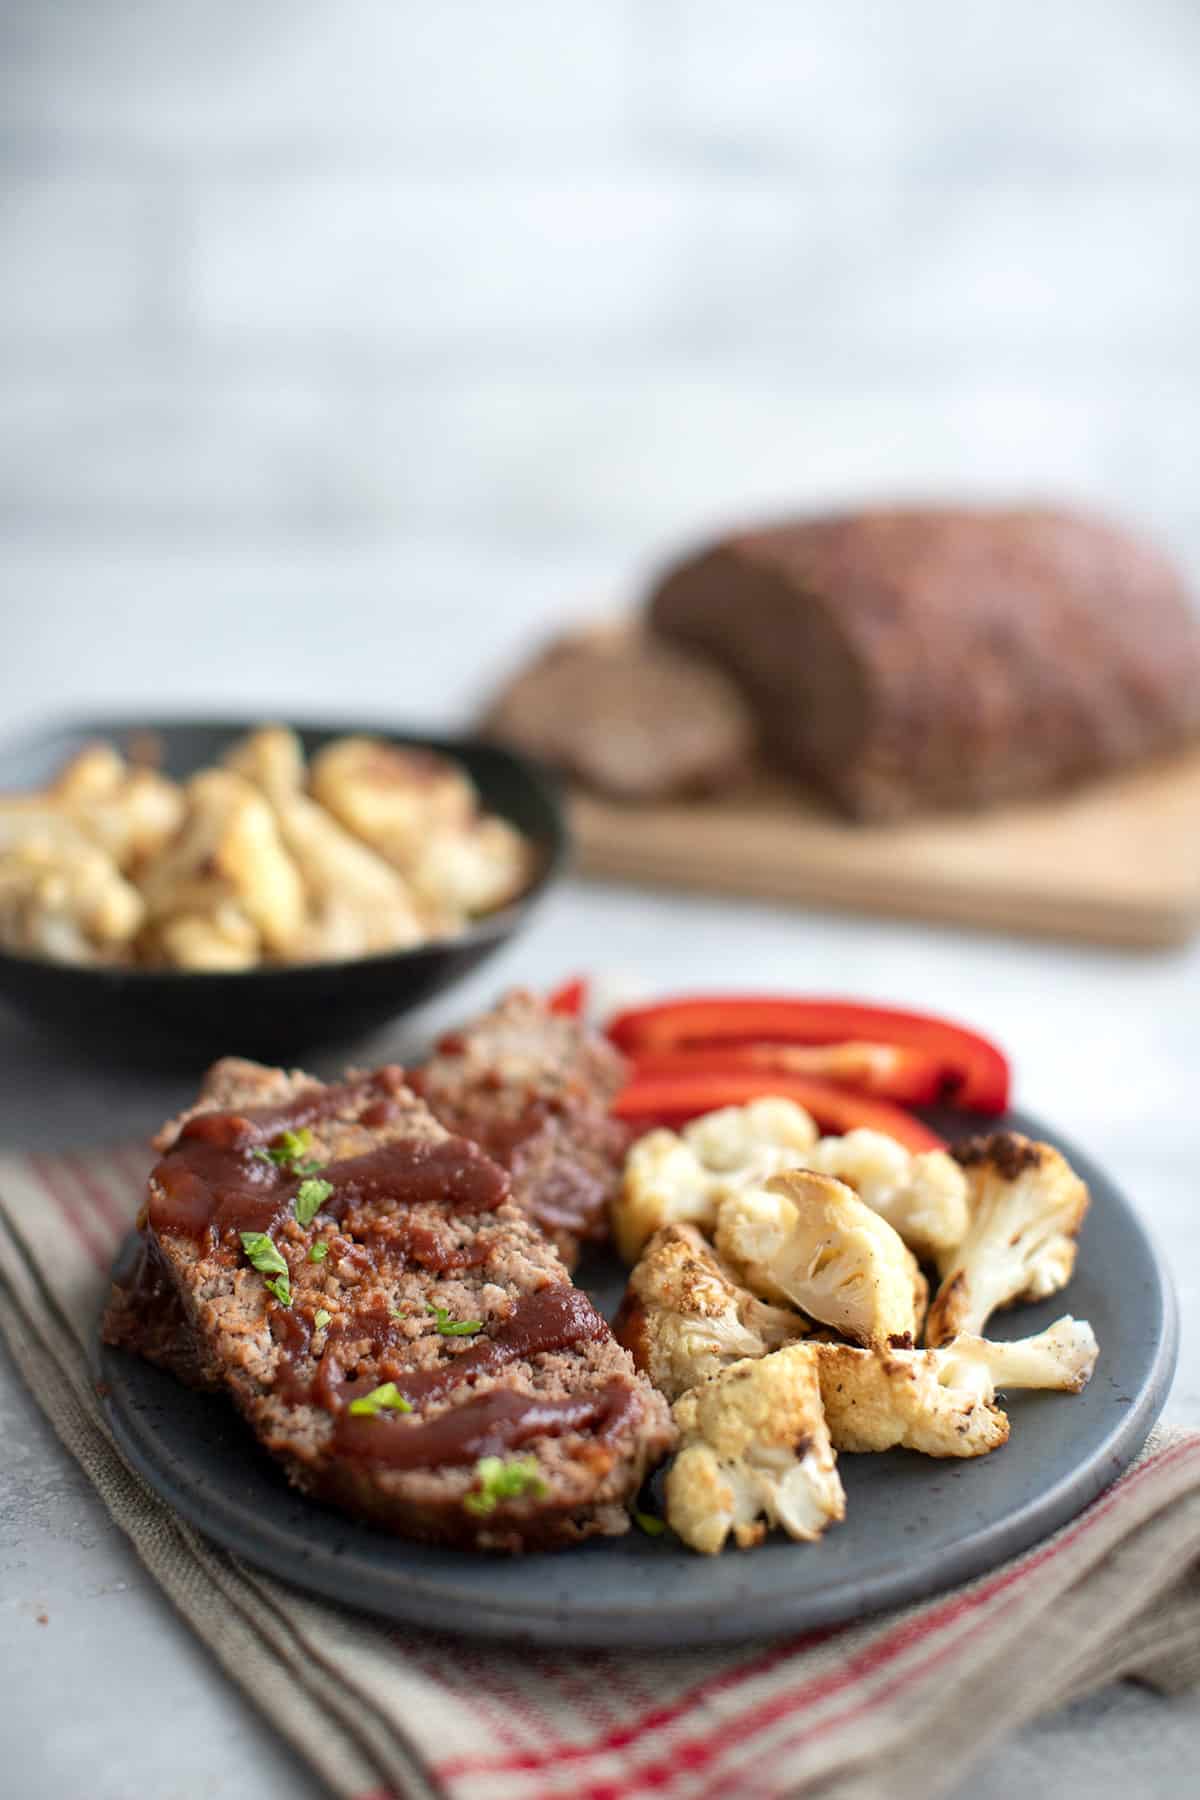 A grey plate filled with slices of slow cooker keto meatloaf, with roasted cauliflower and red peppers as well.